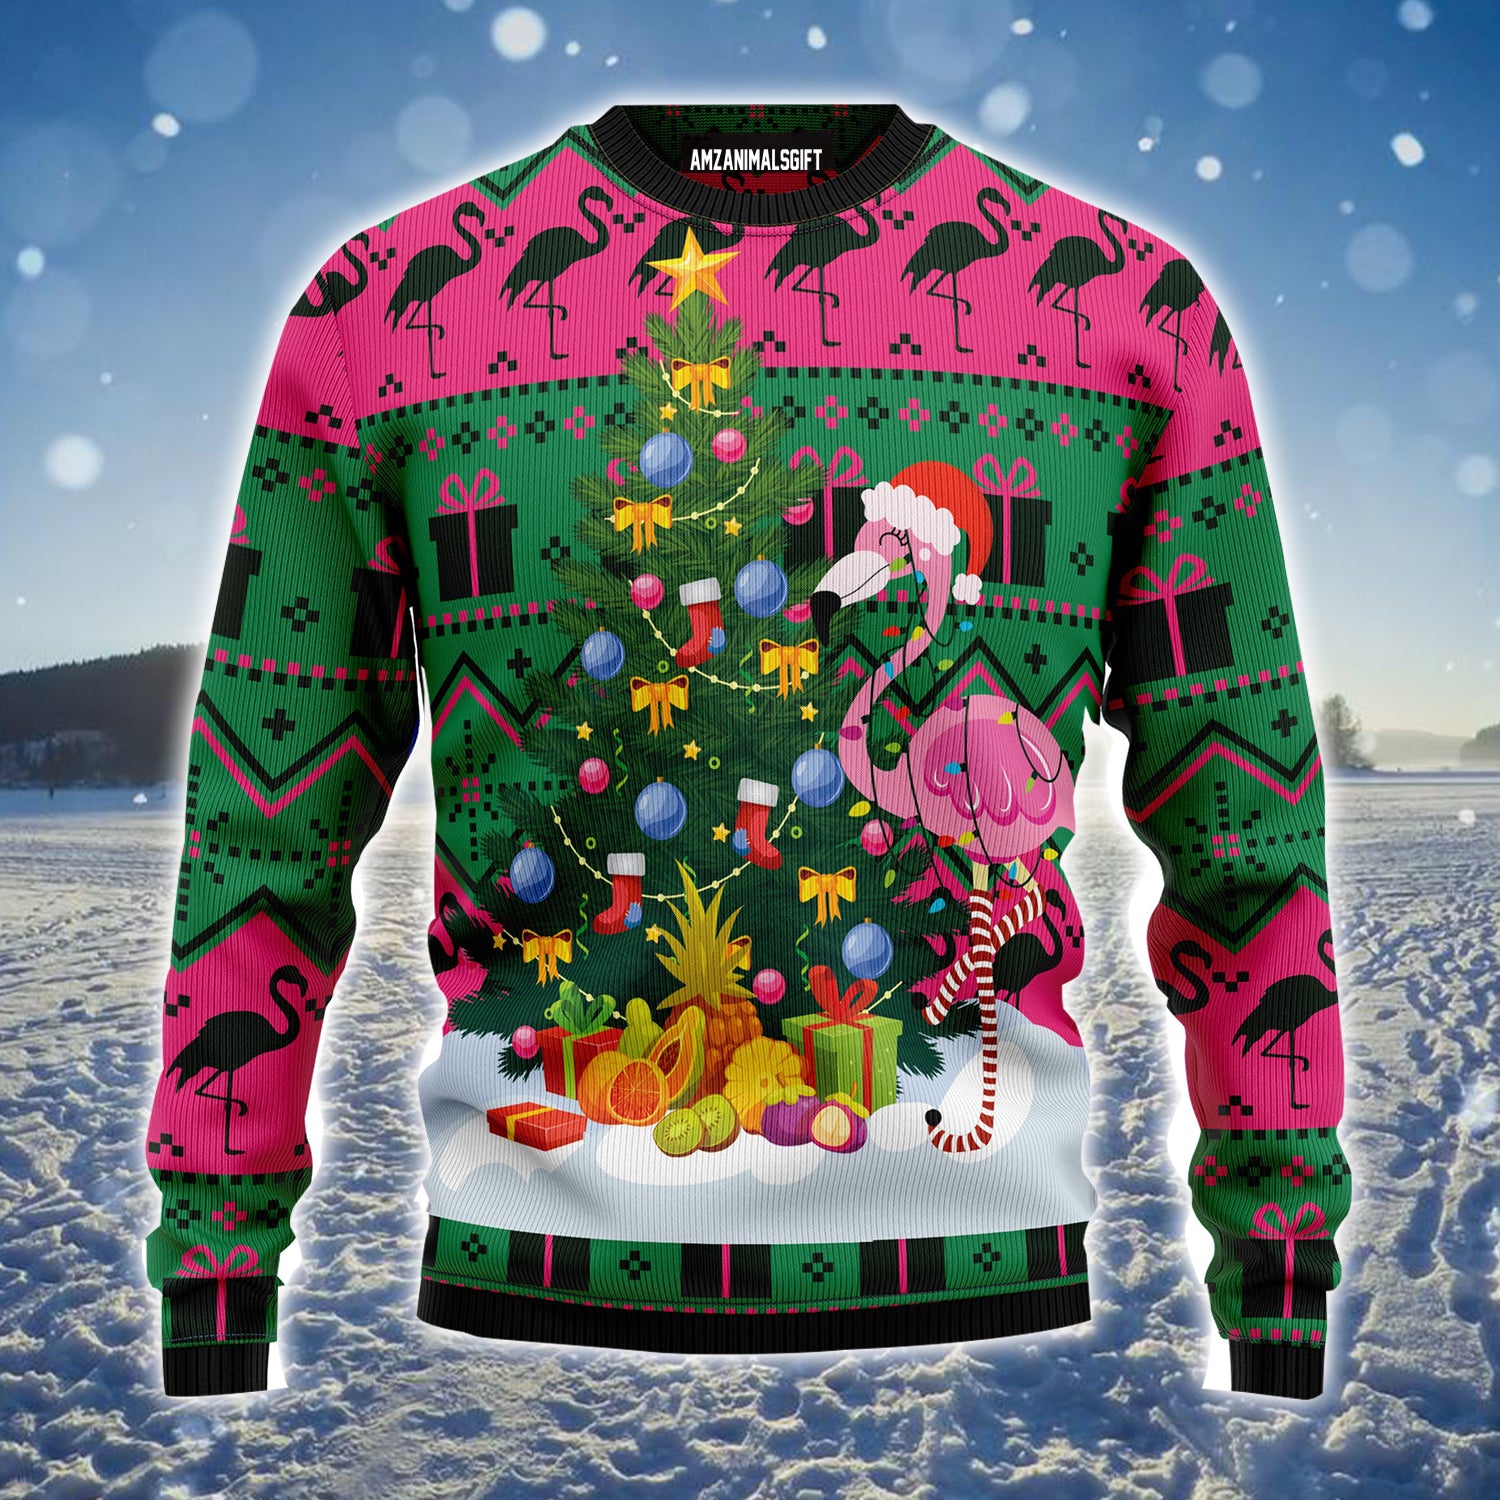 Flamingo Ugly Christmas Sweater, Christmas Tree Ugly Sweater For Men & Women - Best Gift For Christmas, Family, Friends